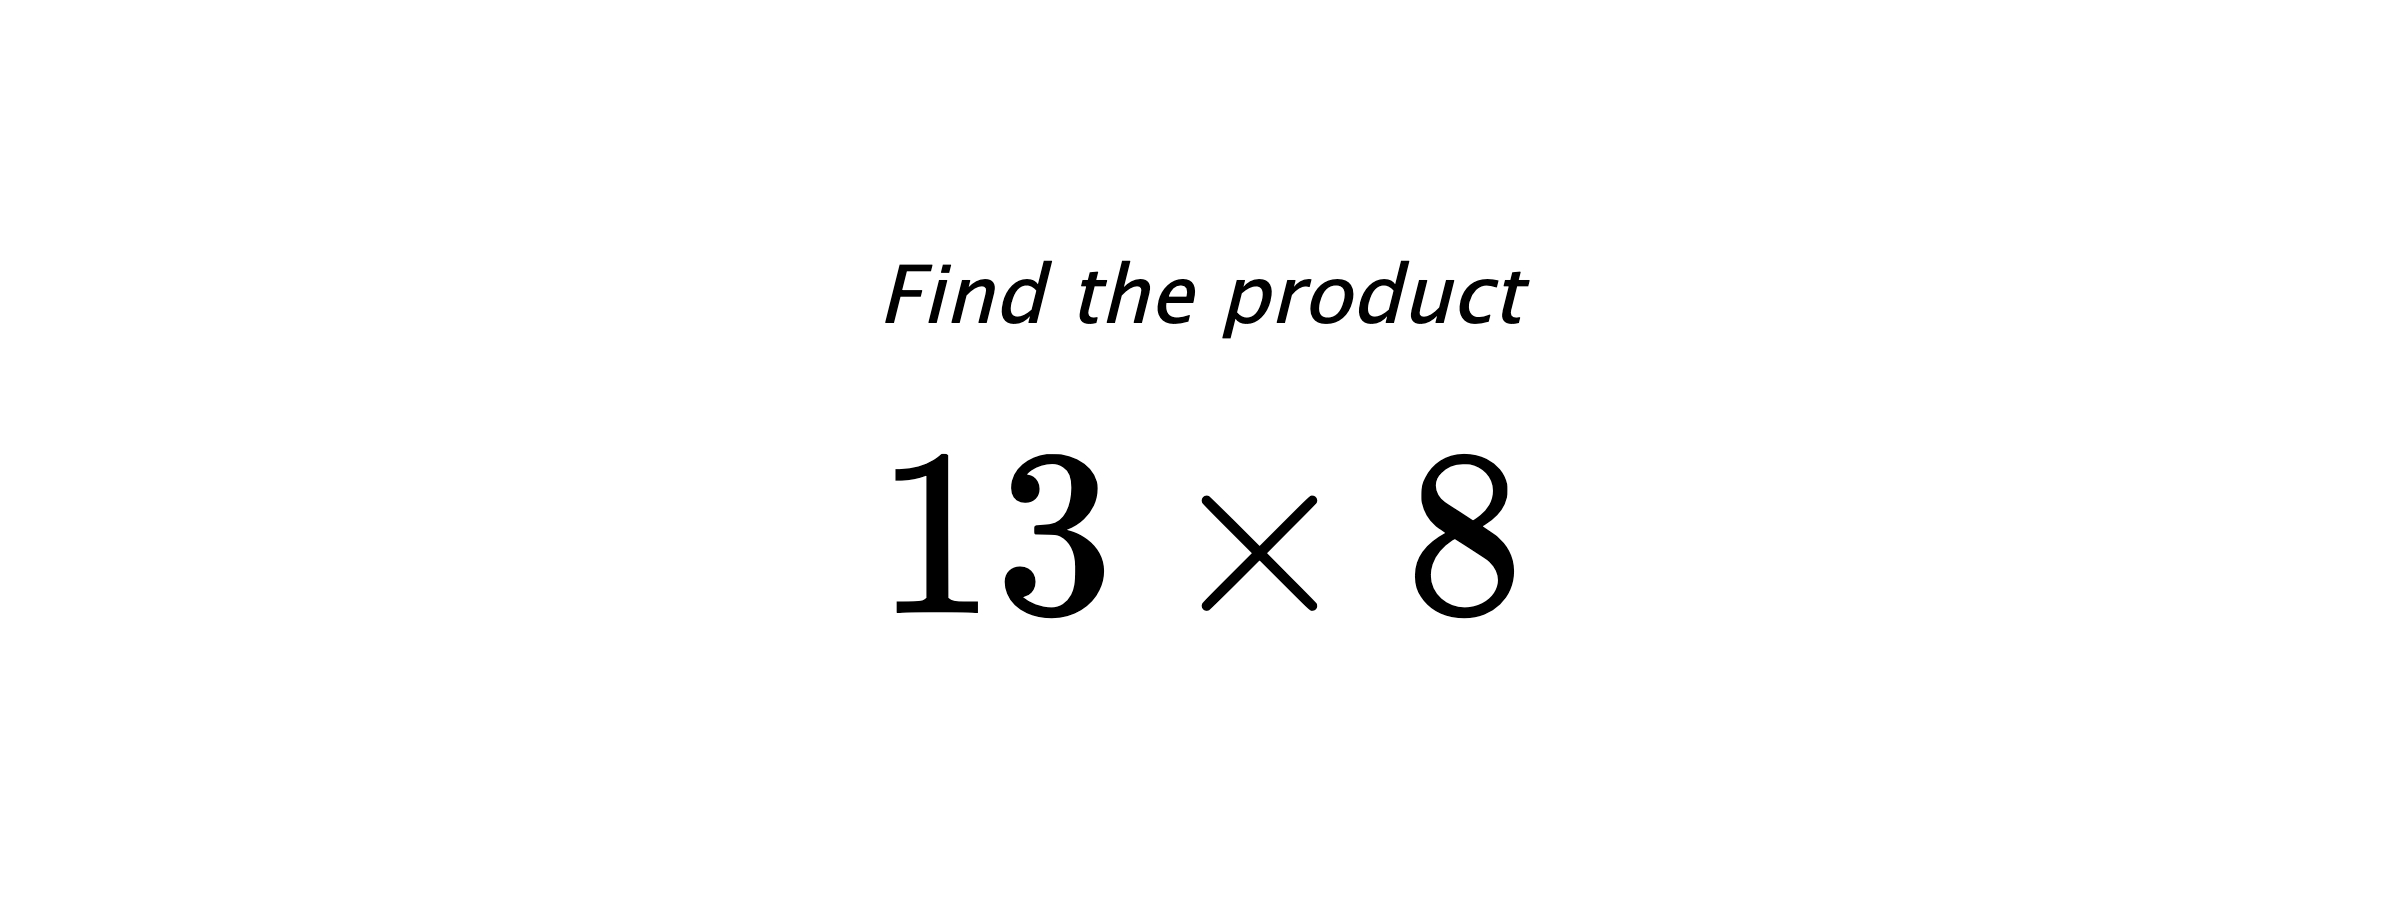 Find the product $ 13 \times 8 $